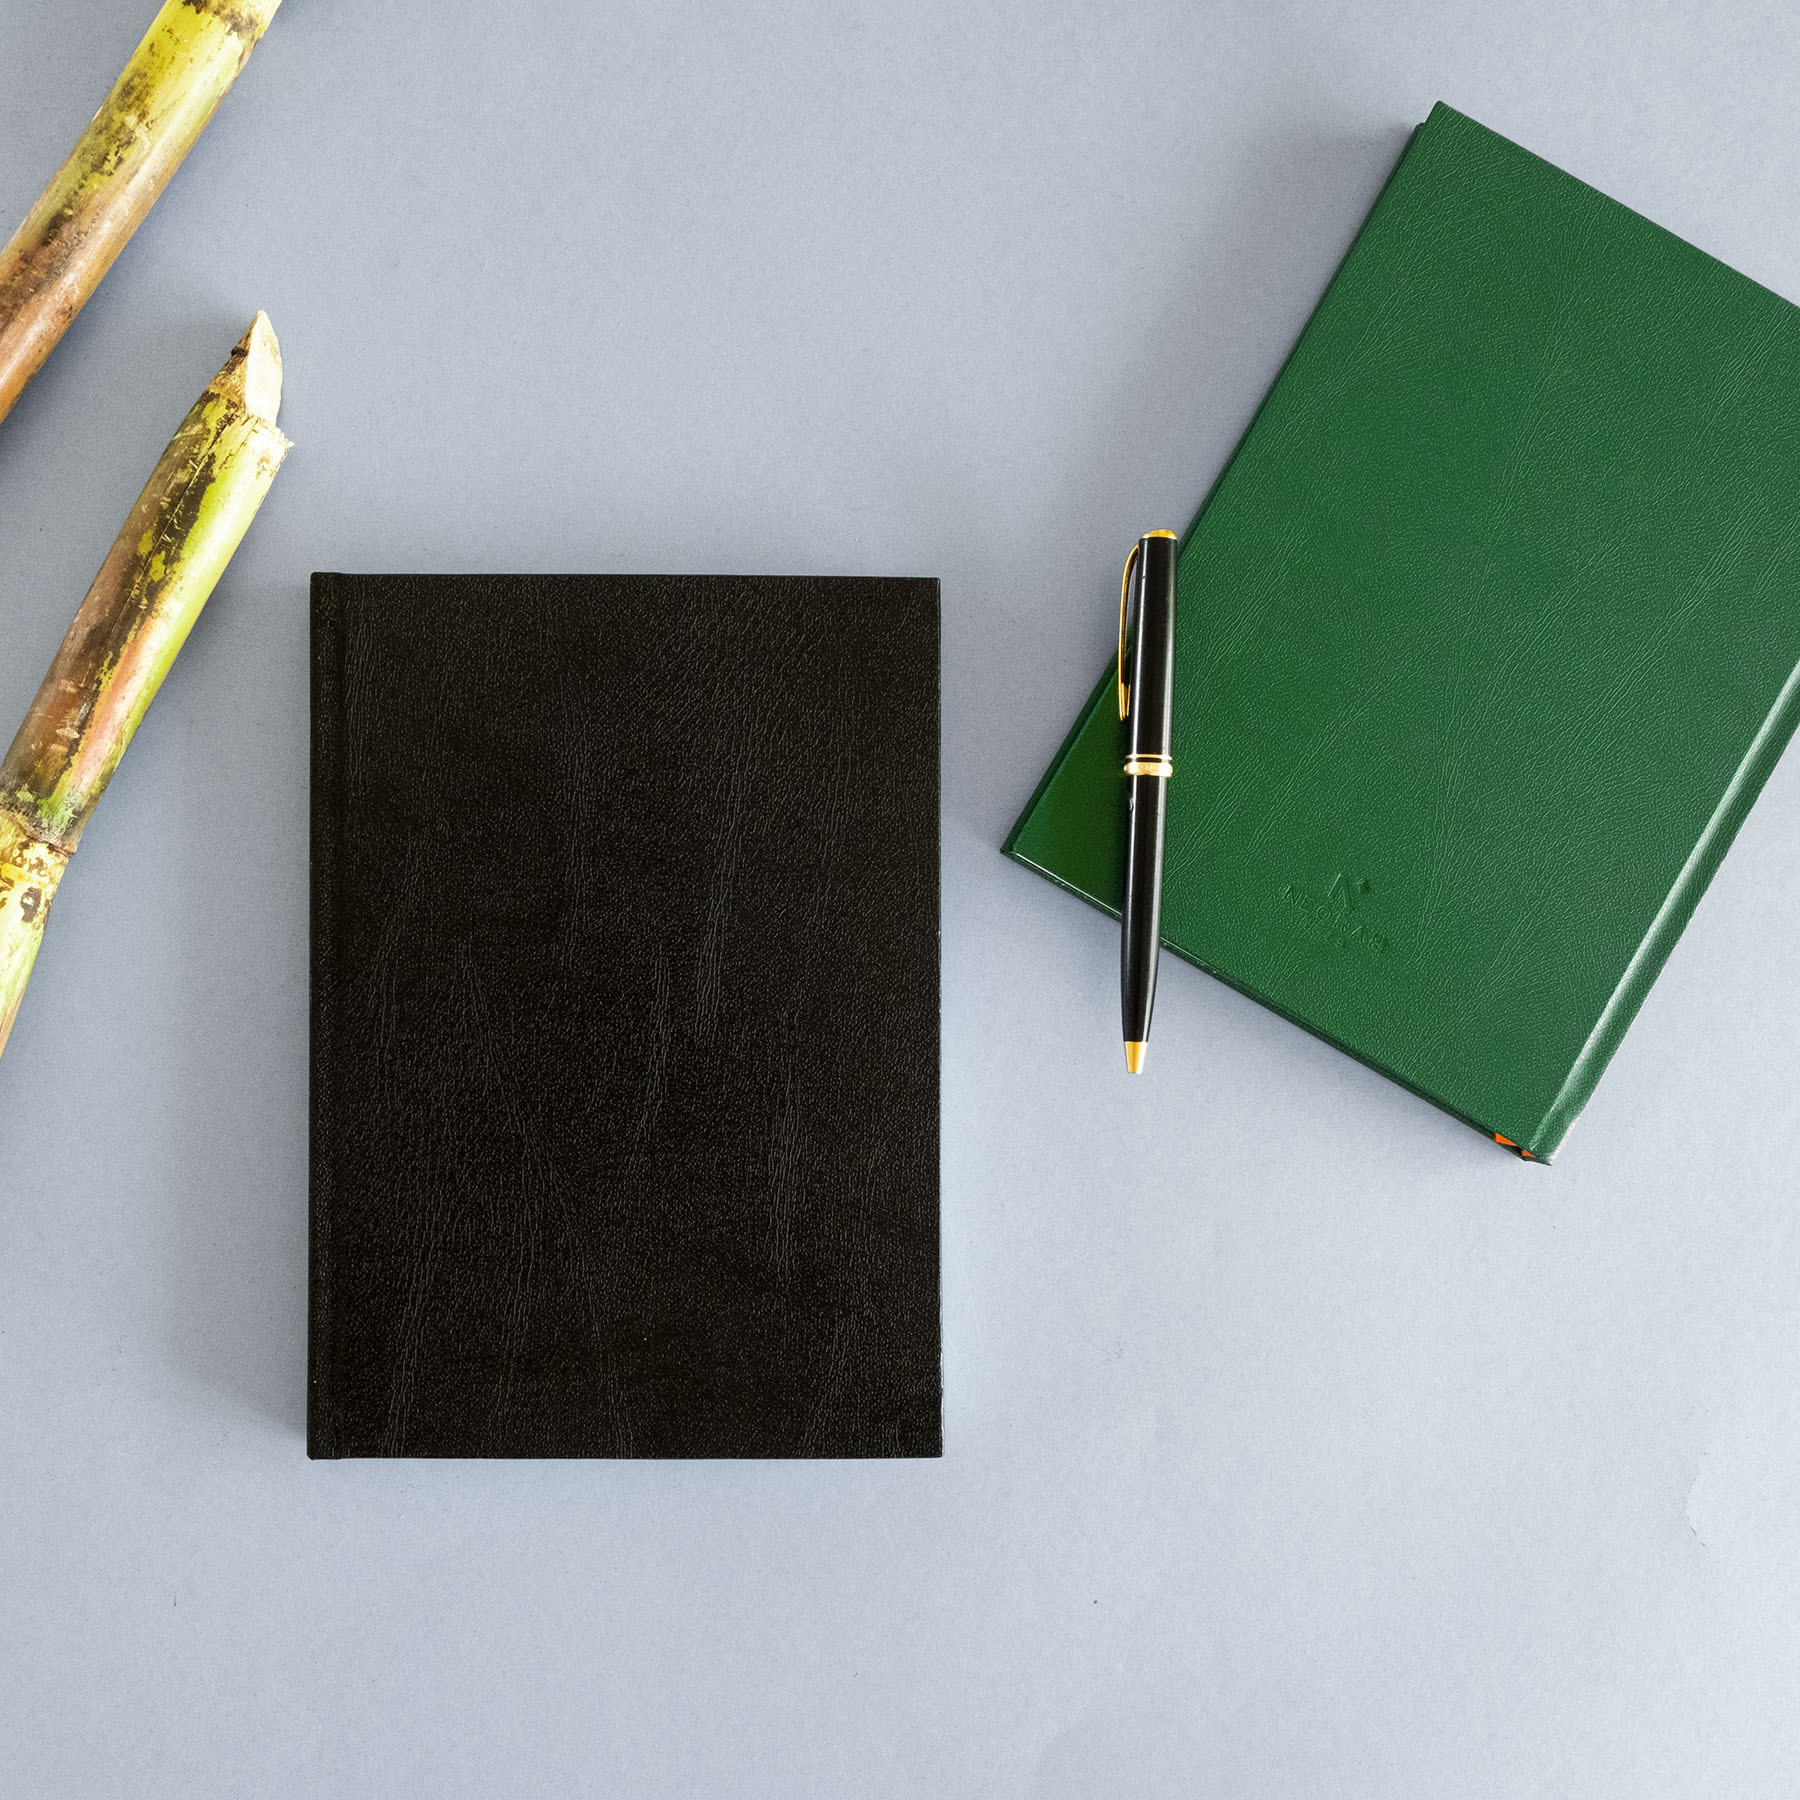 We move a step ahead in our mission in safeguarding Mother Nature with the new NEORAH GRASS FIBRE OFFICE NOTEBOOKS. 